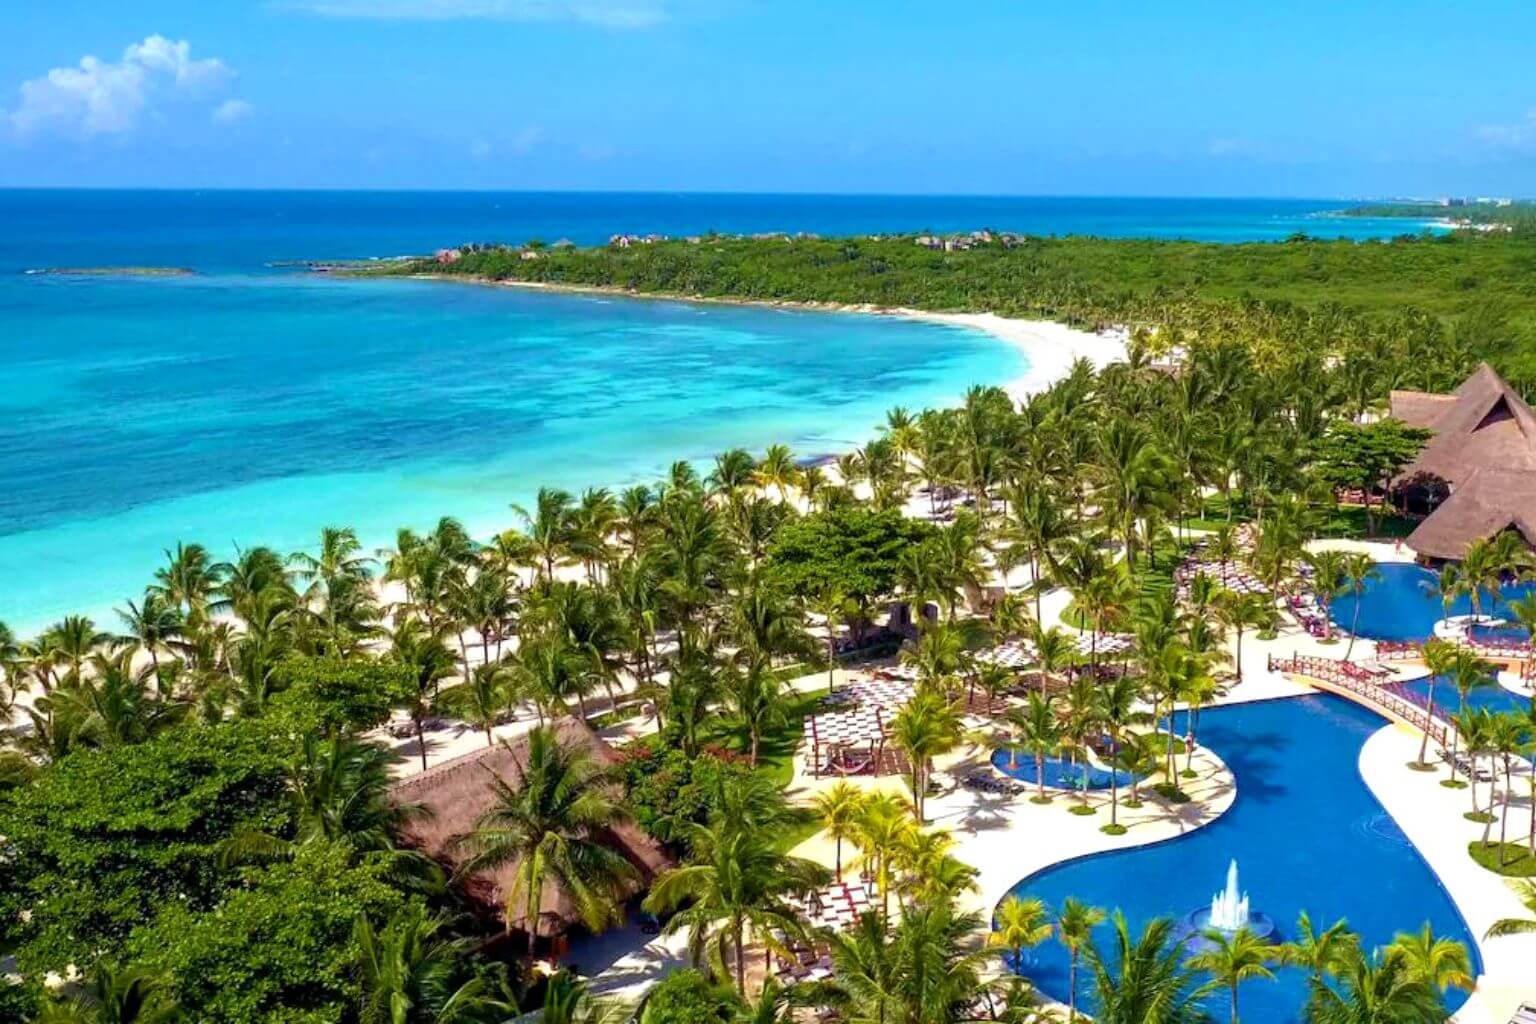 A fantastic view of the pools, beach and ocean at the Barcelo Maya Beach hotel.